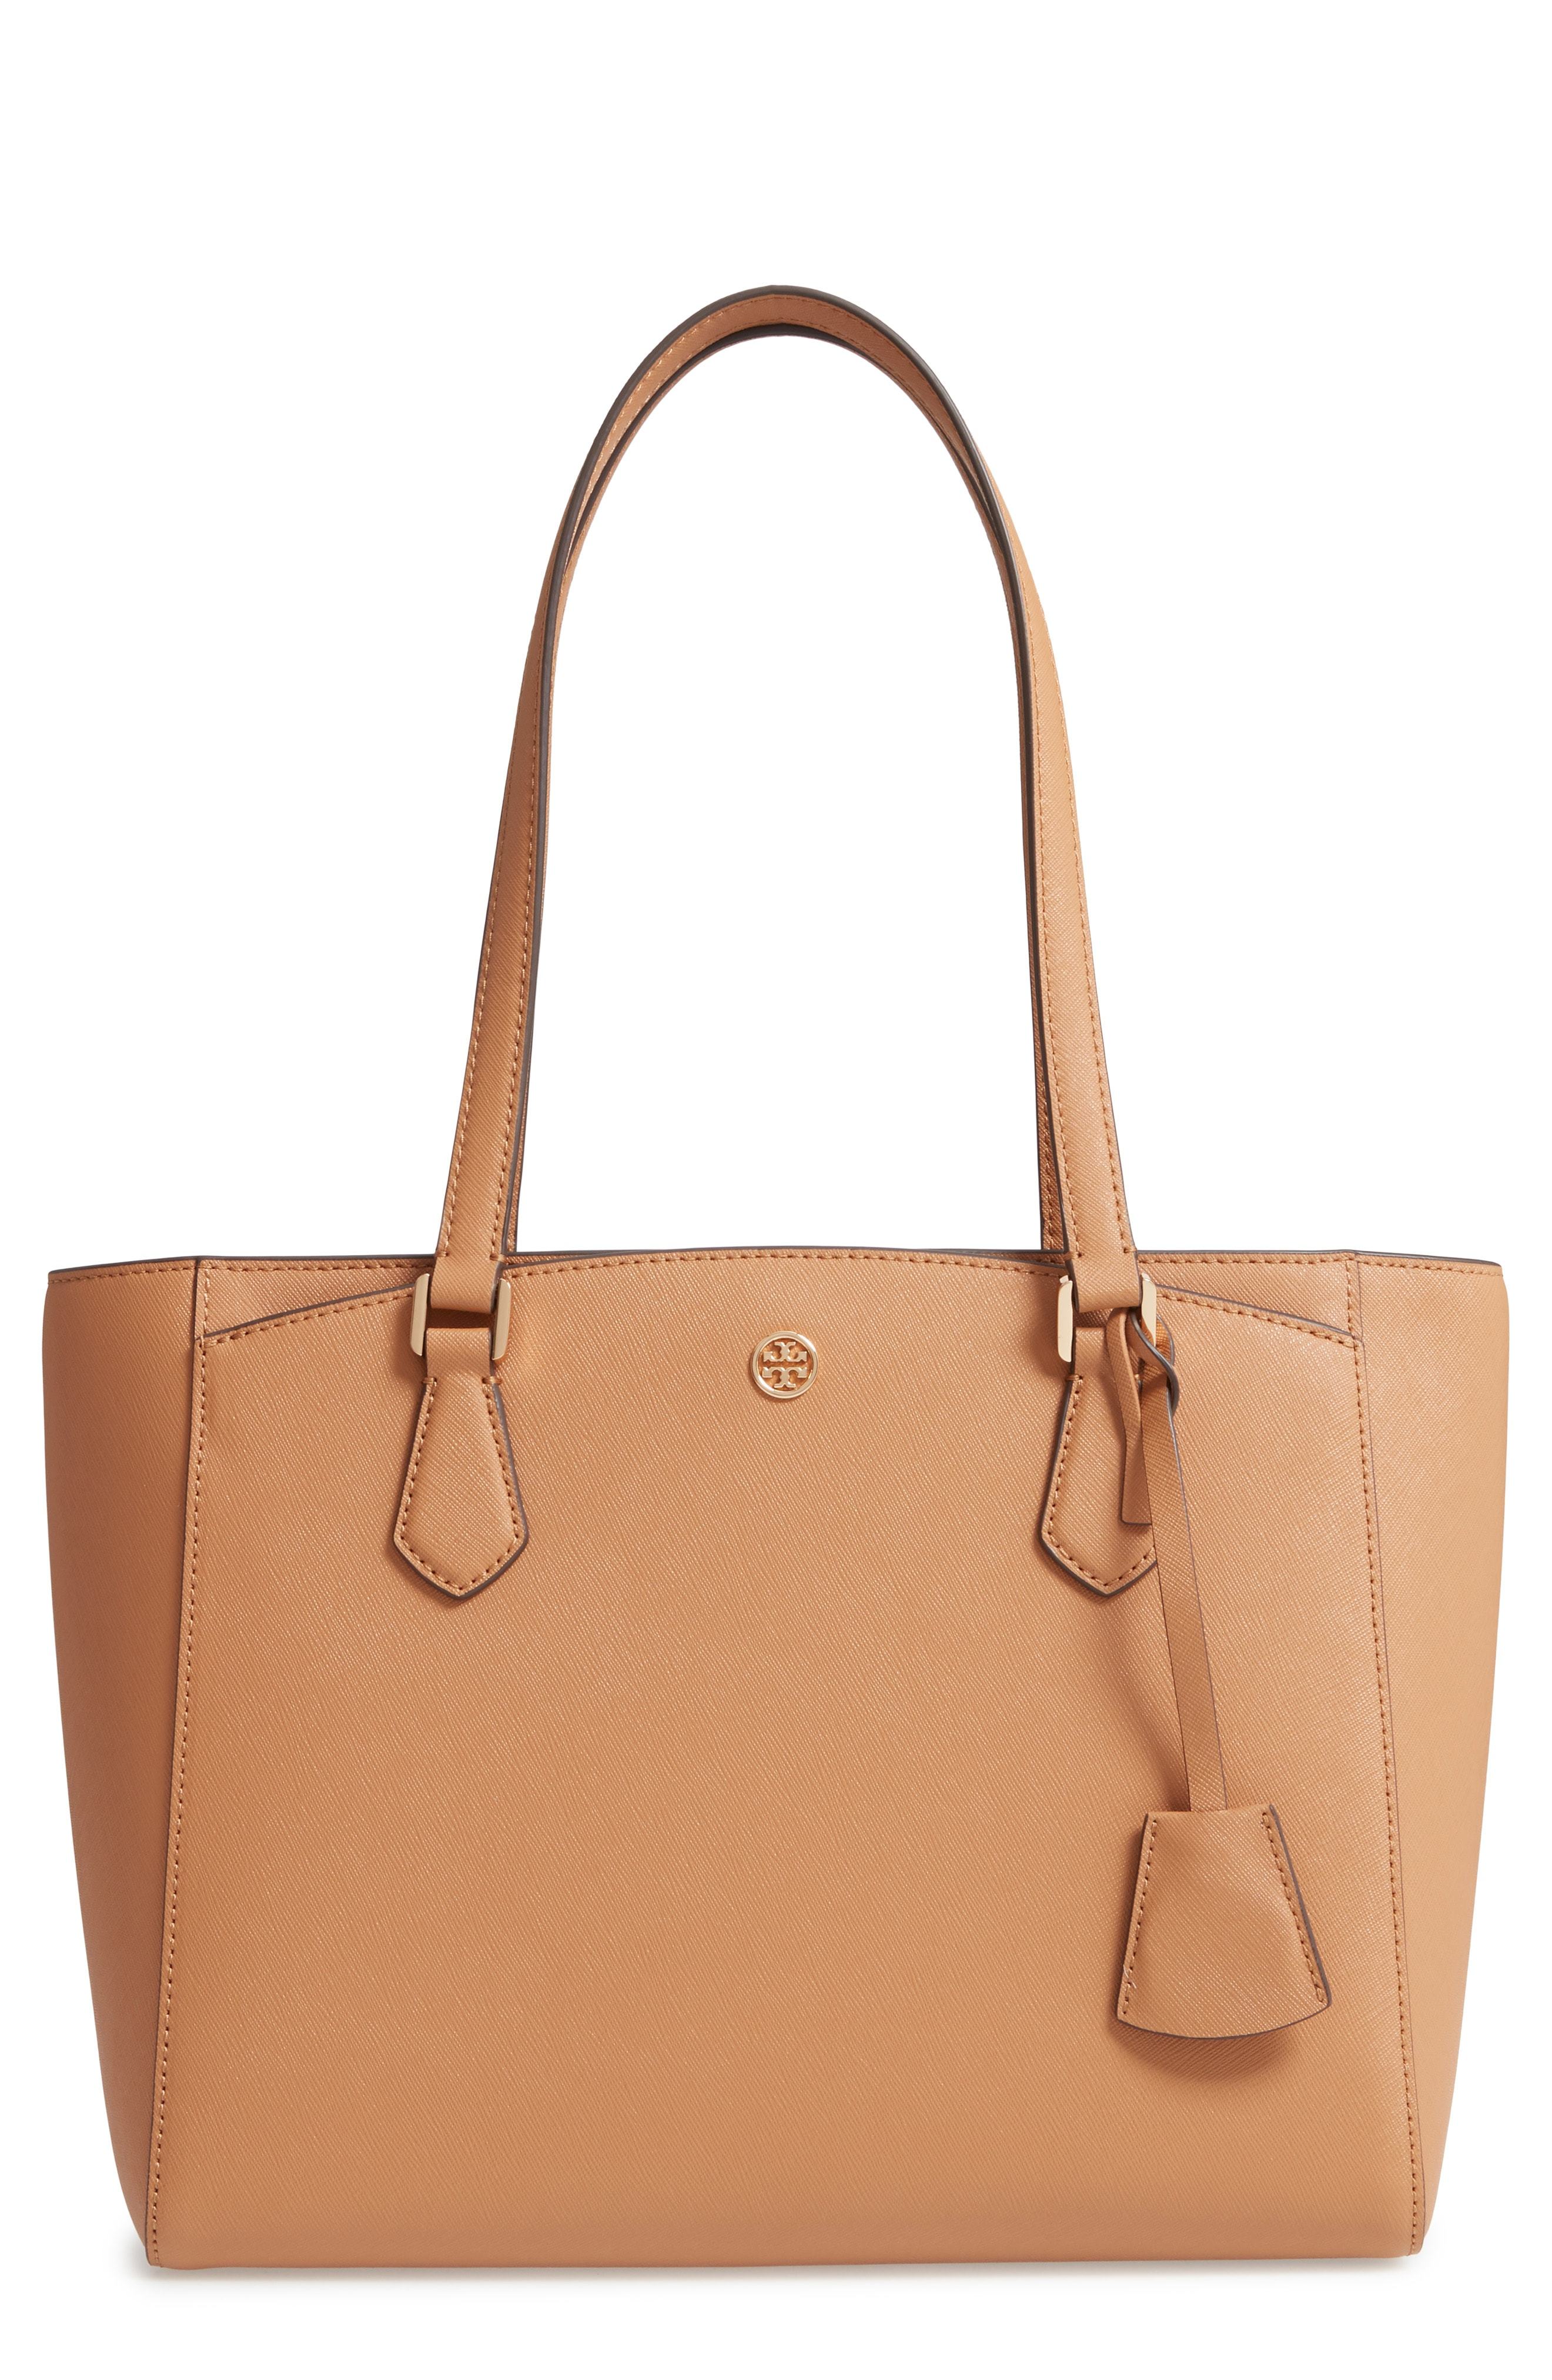 Tory Burch Robinson Leather Tote 